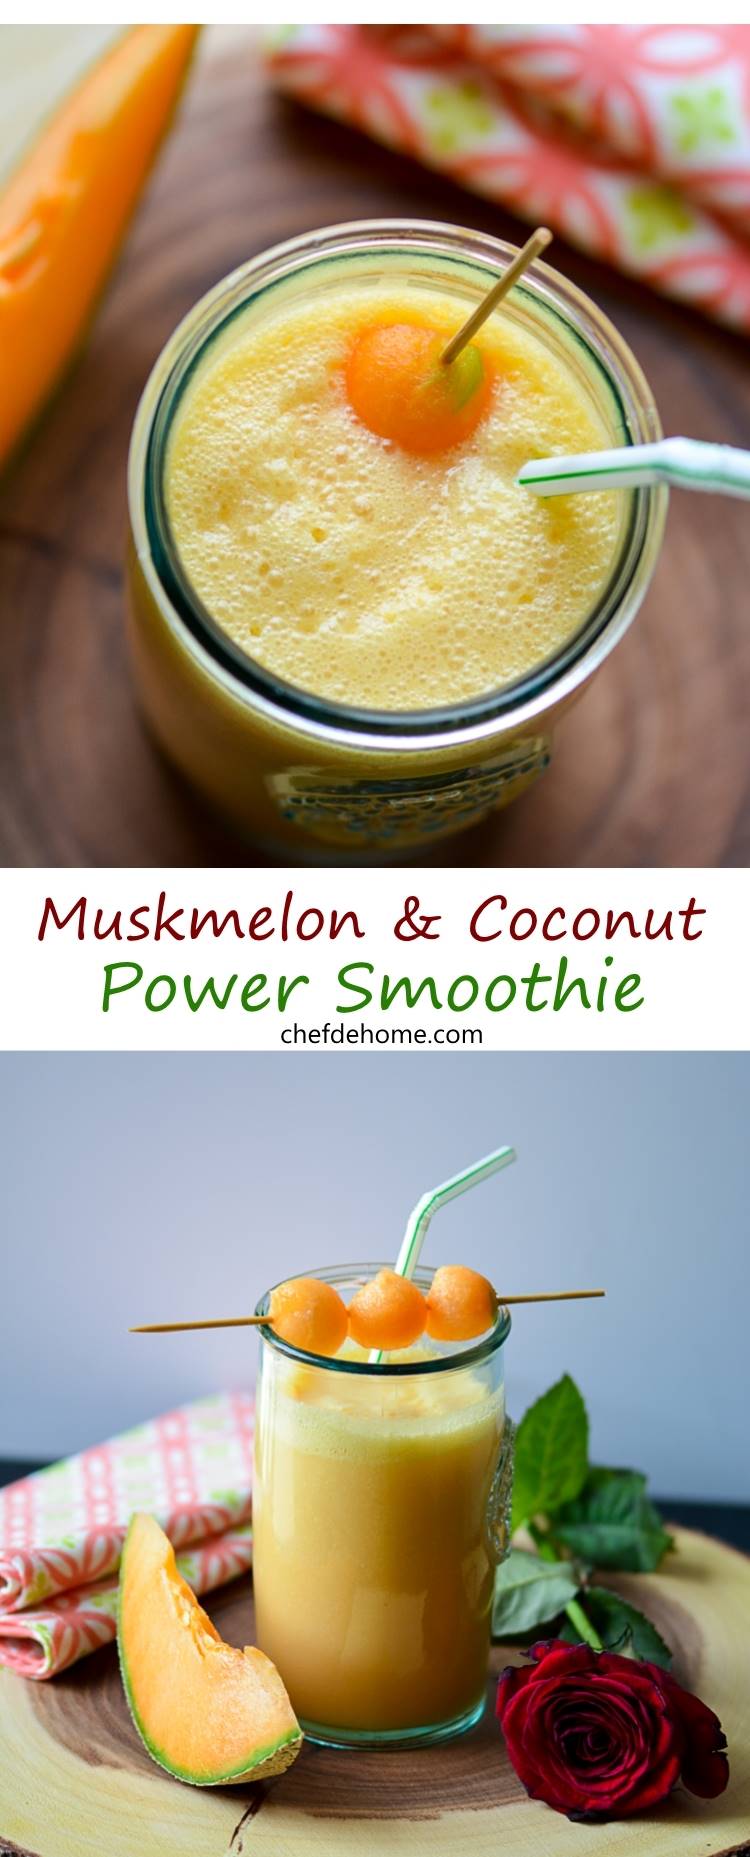 Gluten Free and Vegan Healthy Muskmelon and Coconut Smoothie | chefdehome.com